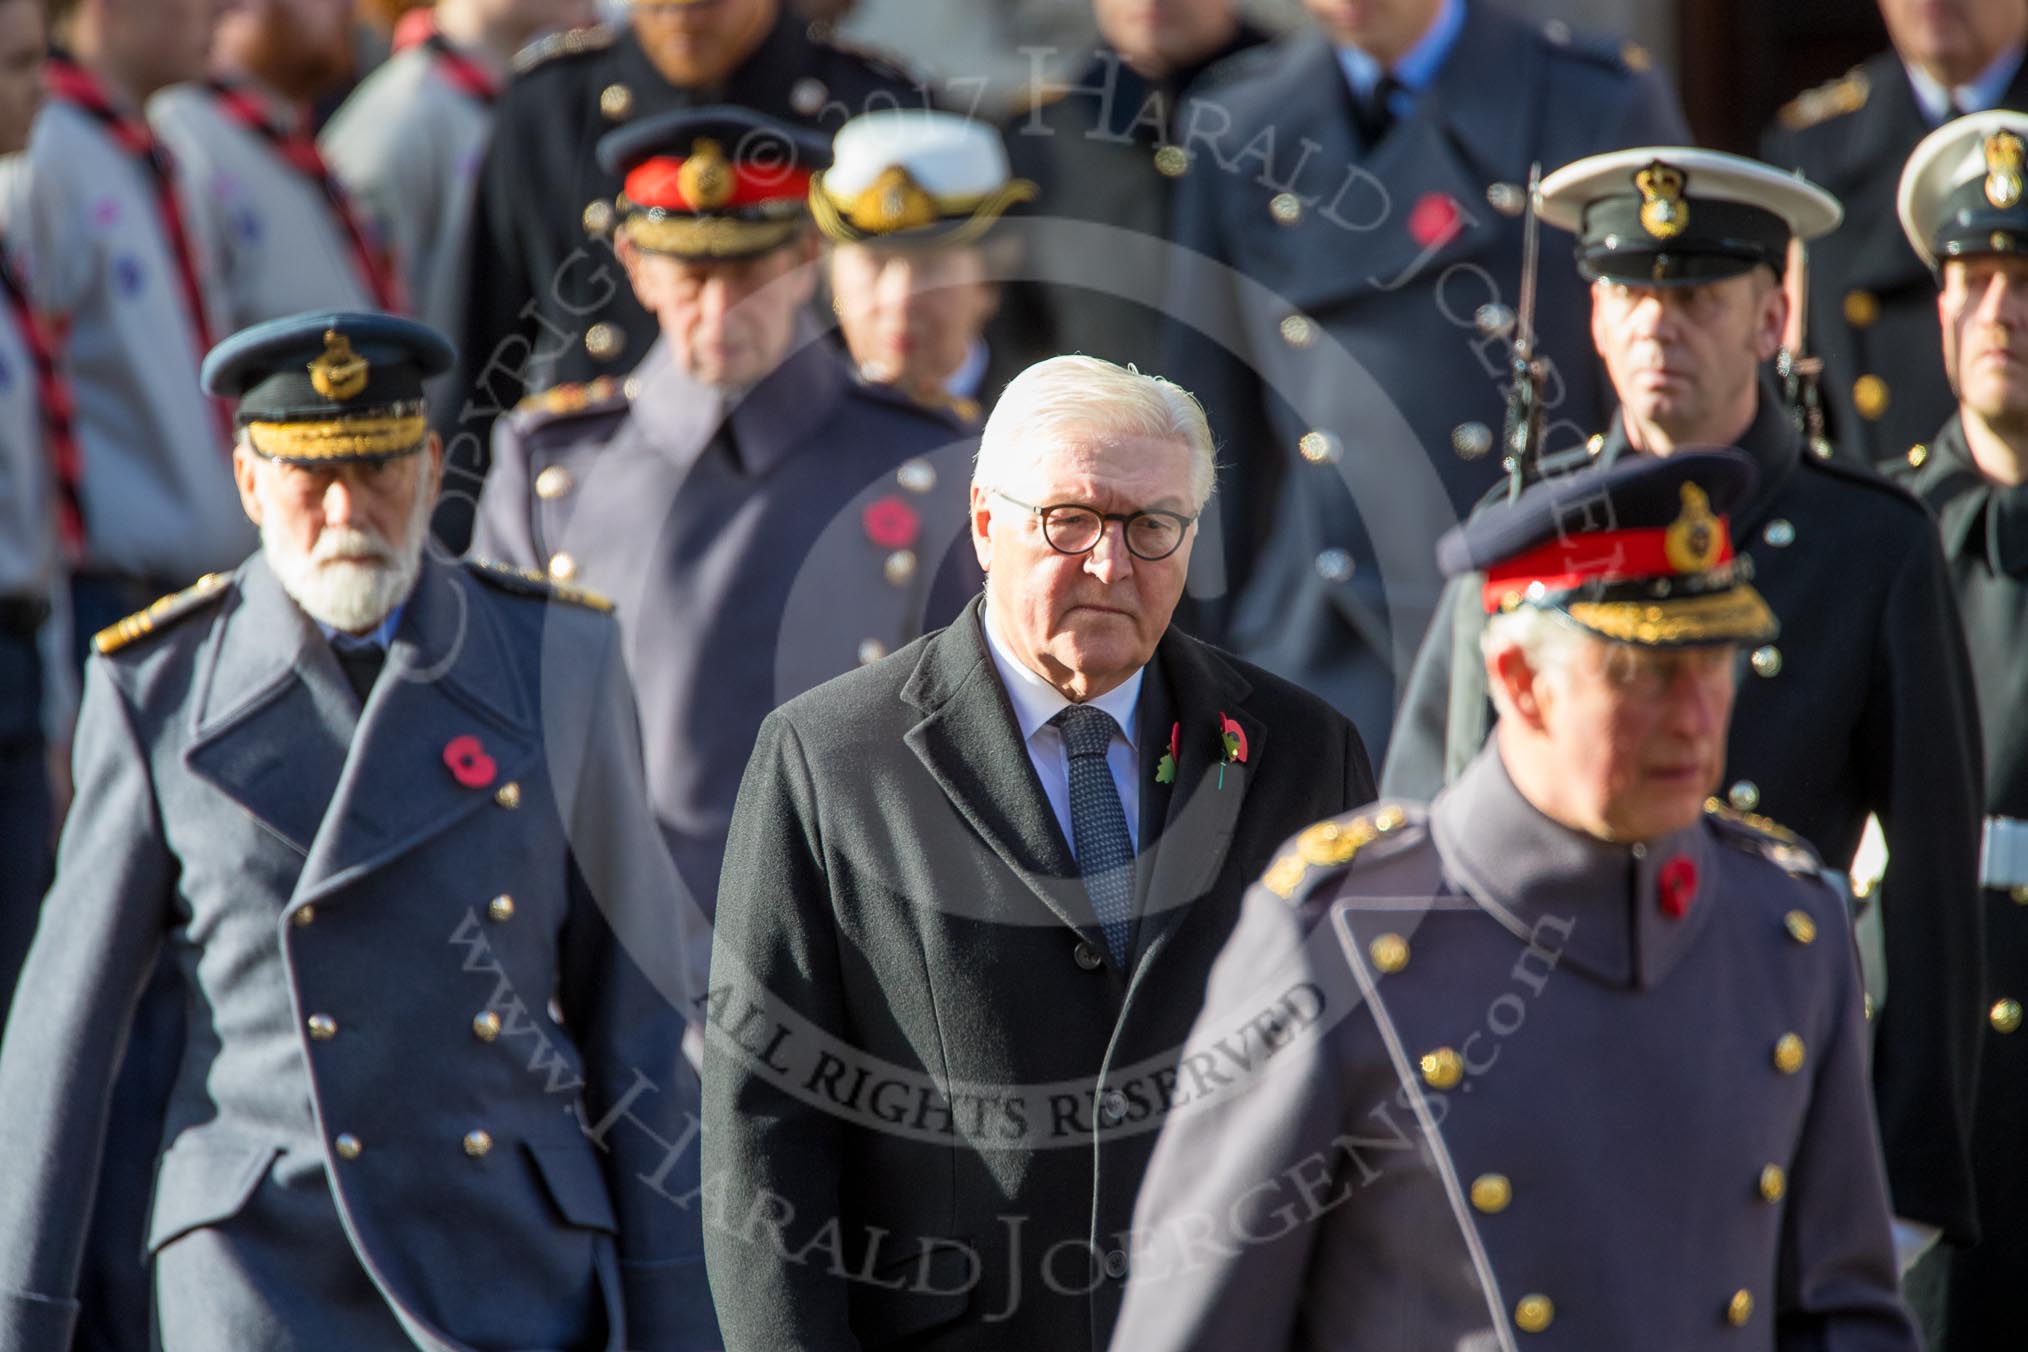 HE The President of the Federal Republic of Germany, Frank-Walter Steinmeier, in focus, between HRH The Prince of Wales (Prince Charles) and HRH Prince Michael of Kent, followed by HRH The Duke of Kent (Prince Edward) and HRH The Princess Royal (Princess Anne) during the during Remembrance Sunday Cenotaph Ceremony 2018 at Horse Guards Parade, Westminster, London, 11 November 2018, 10:58.